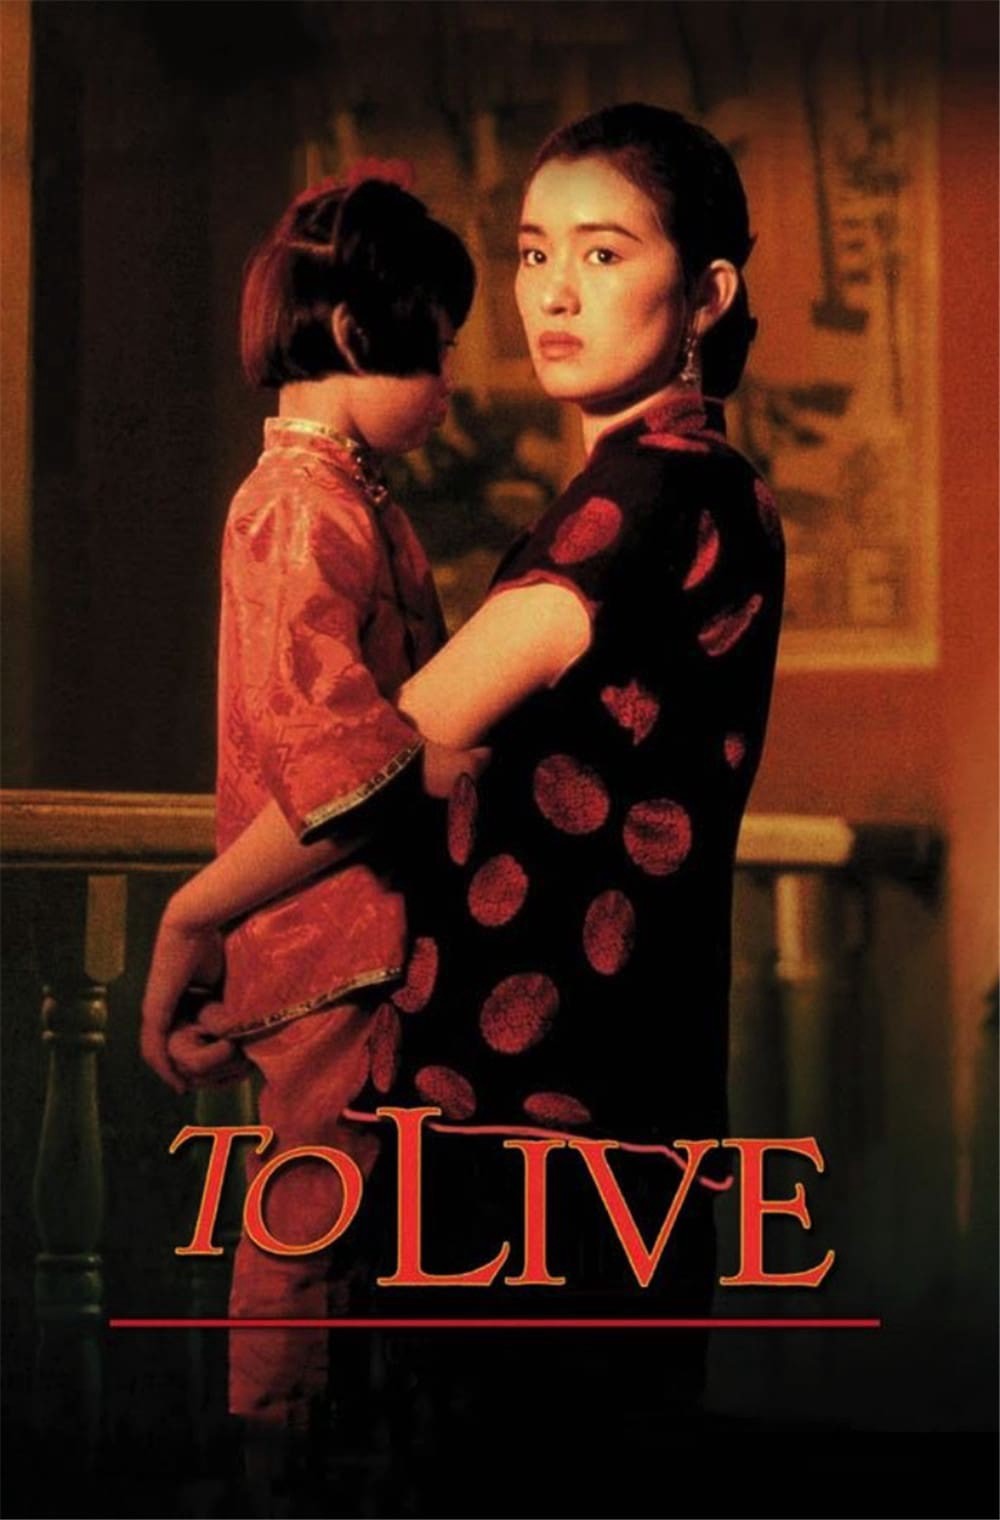 To Live (To Live) [1994]